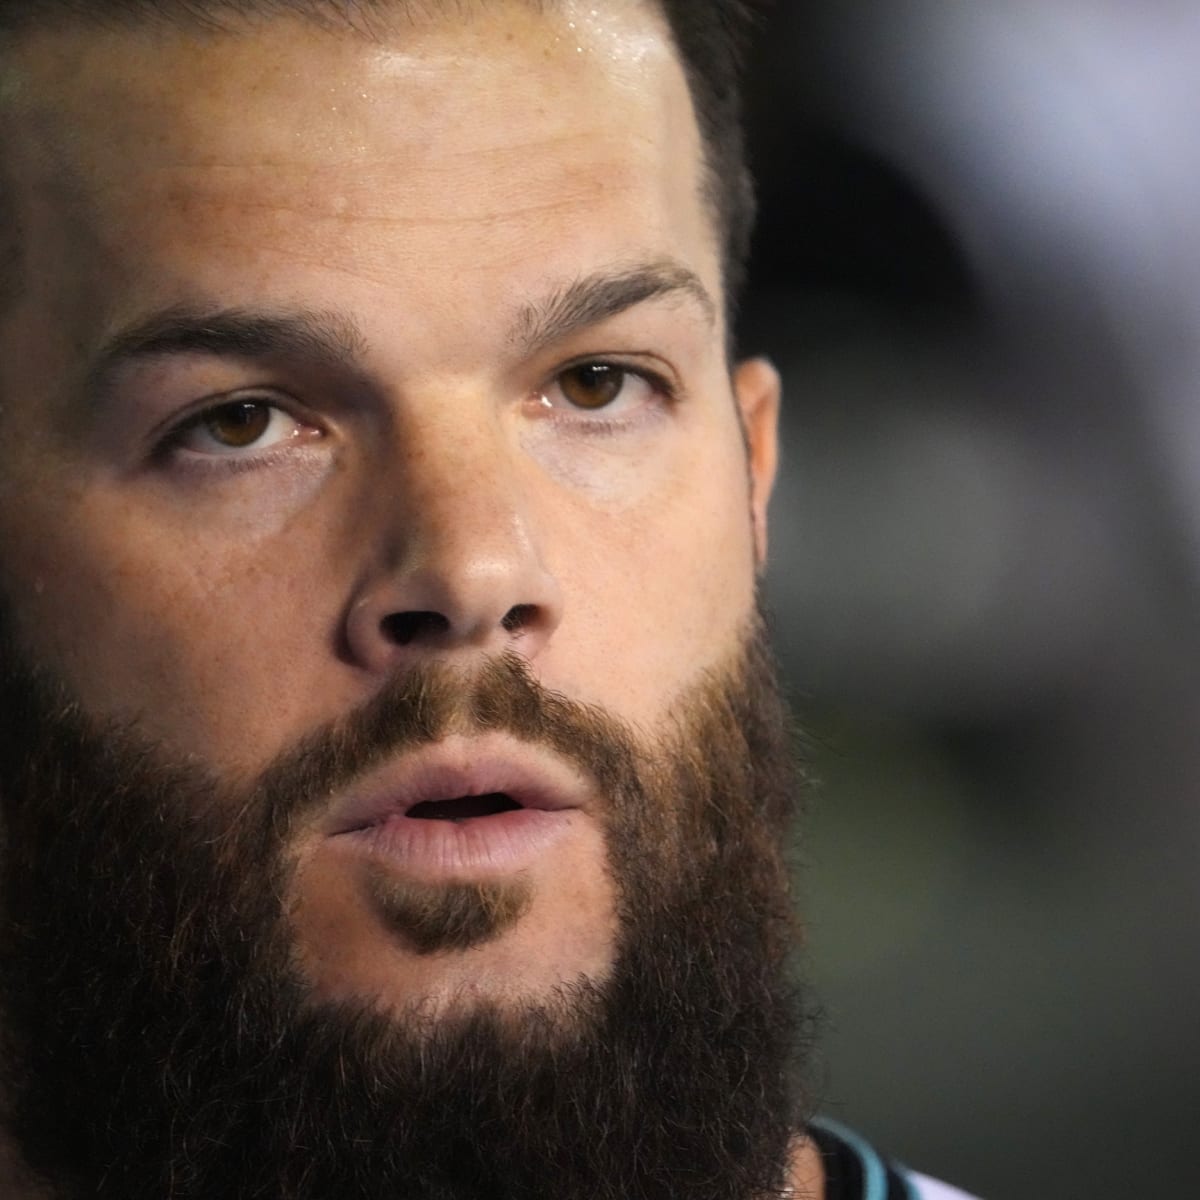 Dallas Keuchel on why he chose to sign a MiLB deal with the Twins